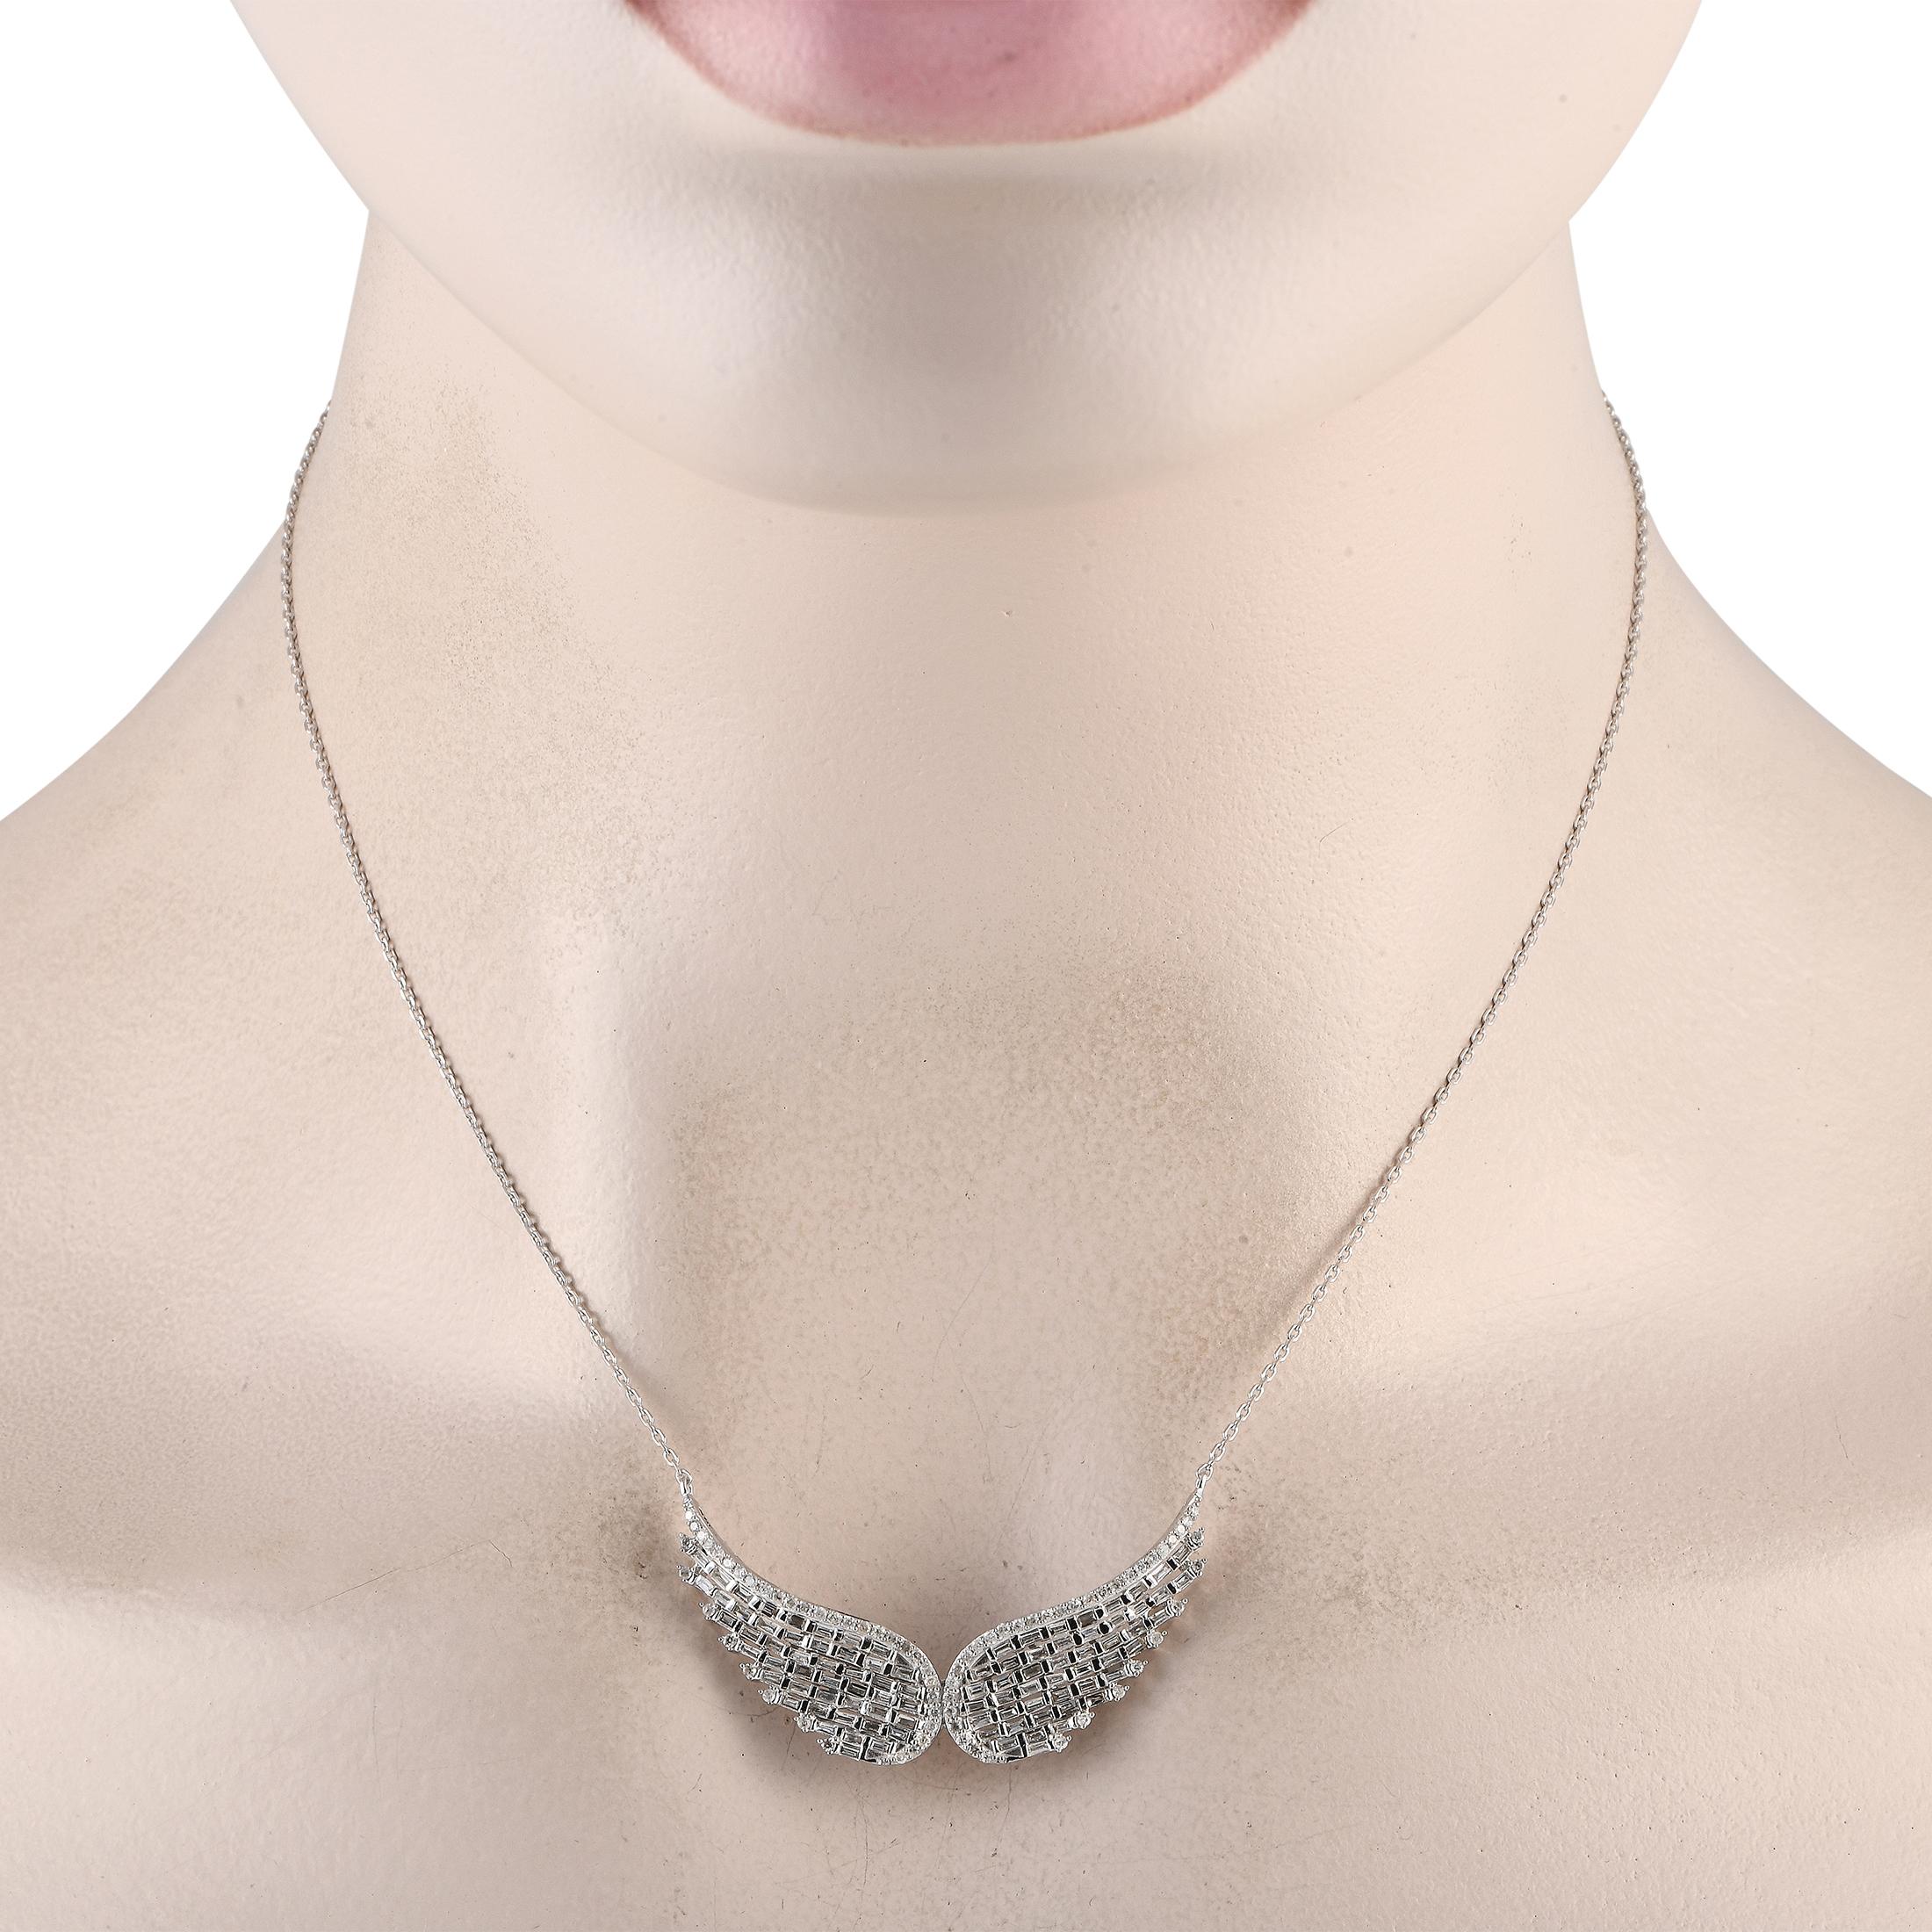 This unforgettable 14K White Gold necklace will serve as a dramatic addition to any luxury jewelry collection. Suspended at the center of a 15 chain, a breathtaking pendant shaped like a pair of wings comes to life thanks to inset Diamonds with a